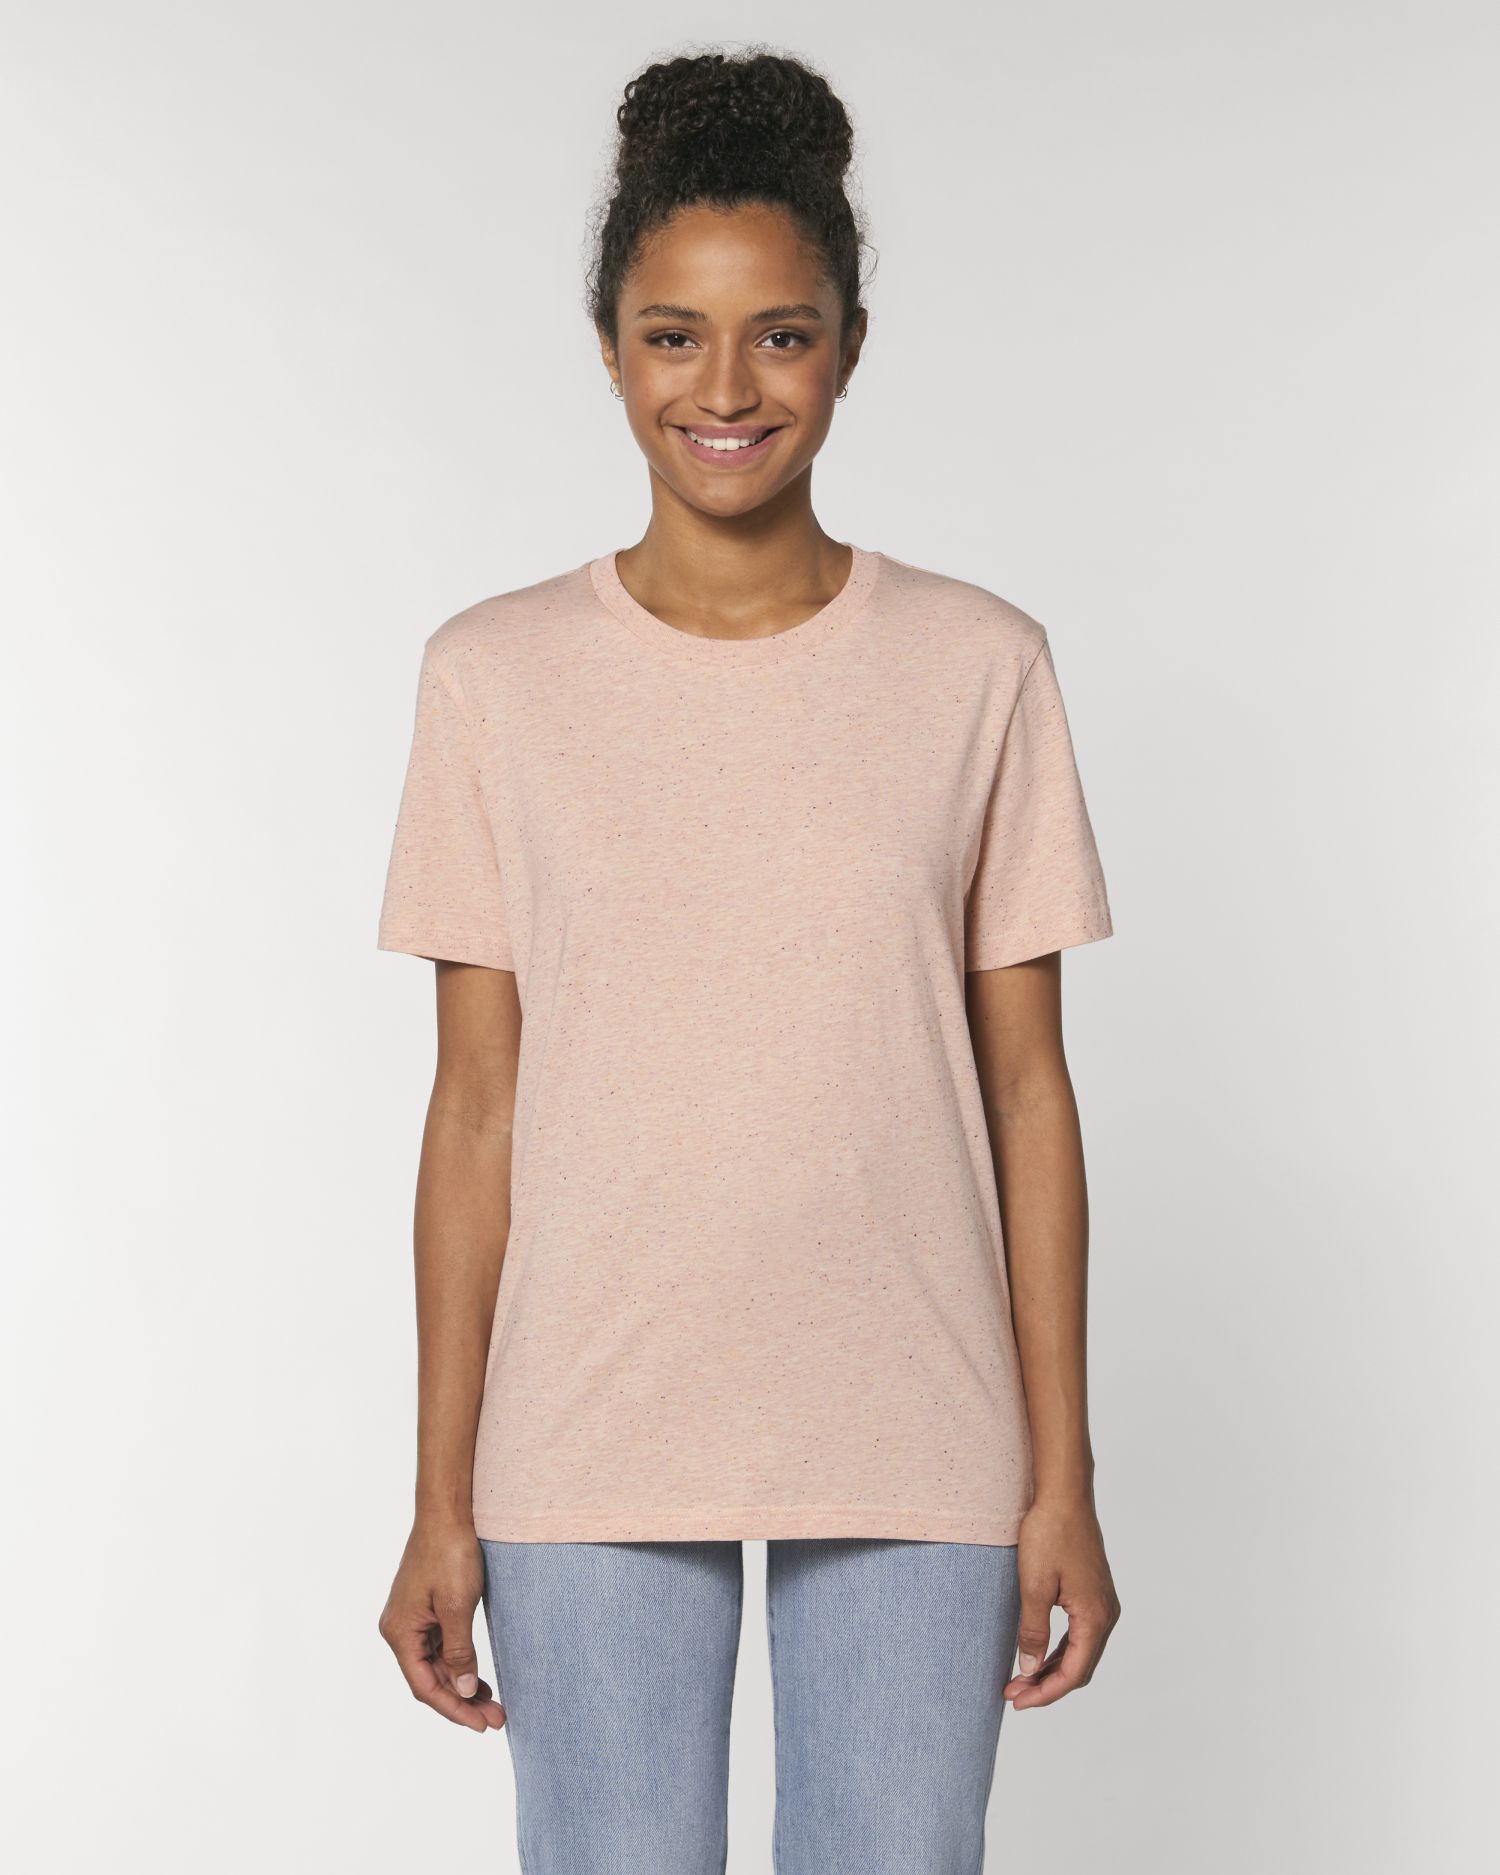 T-Shirt Creator in Farbe Heather Neppy Pink